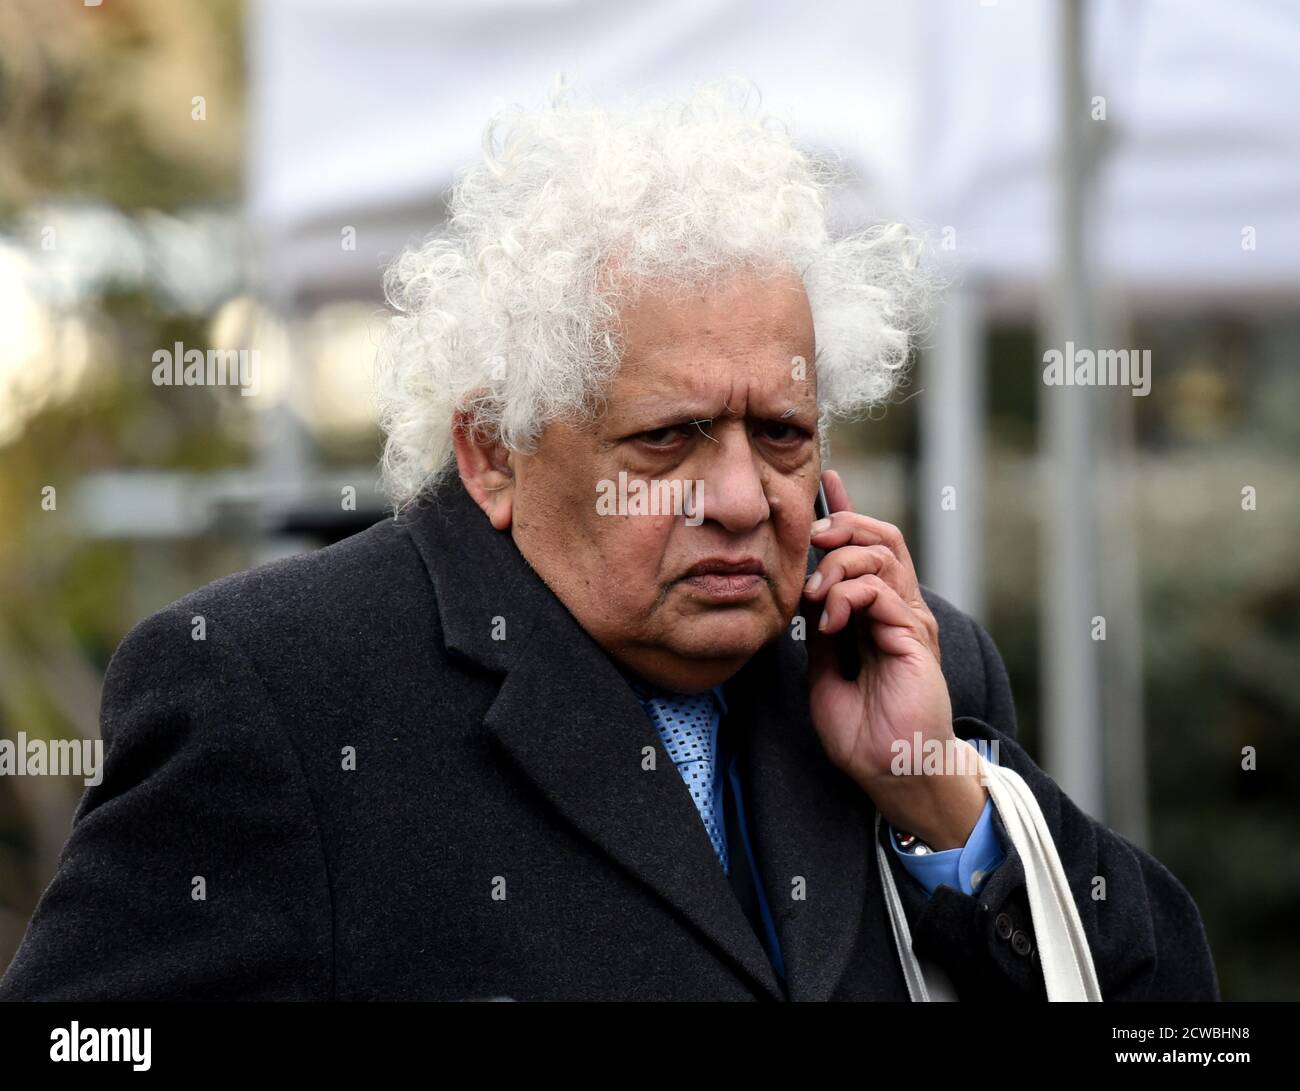 Photograph of Meghnad Desai, Baron Desai. Meghnad Jagdishchandra Desai, Baron Desai (1940-) a British economist and Labour politician. He stood unsuccessfully for the position of Lord Speaker in the British House of Lords in 2011, the first ever non-UK born candidate to do so. Stock Photo